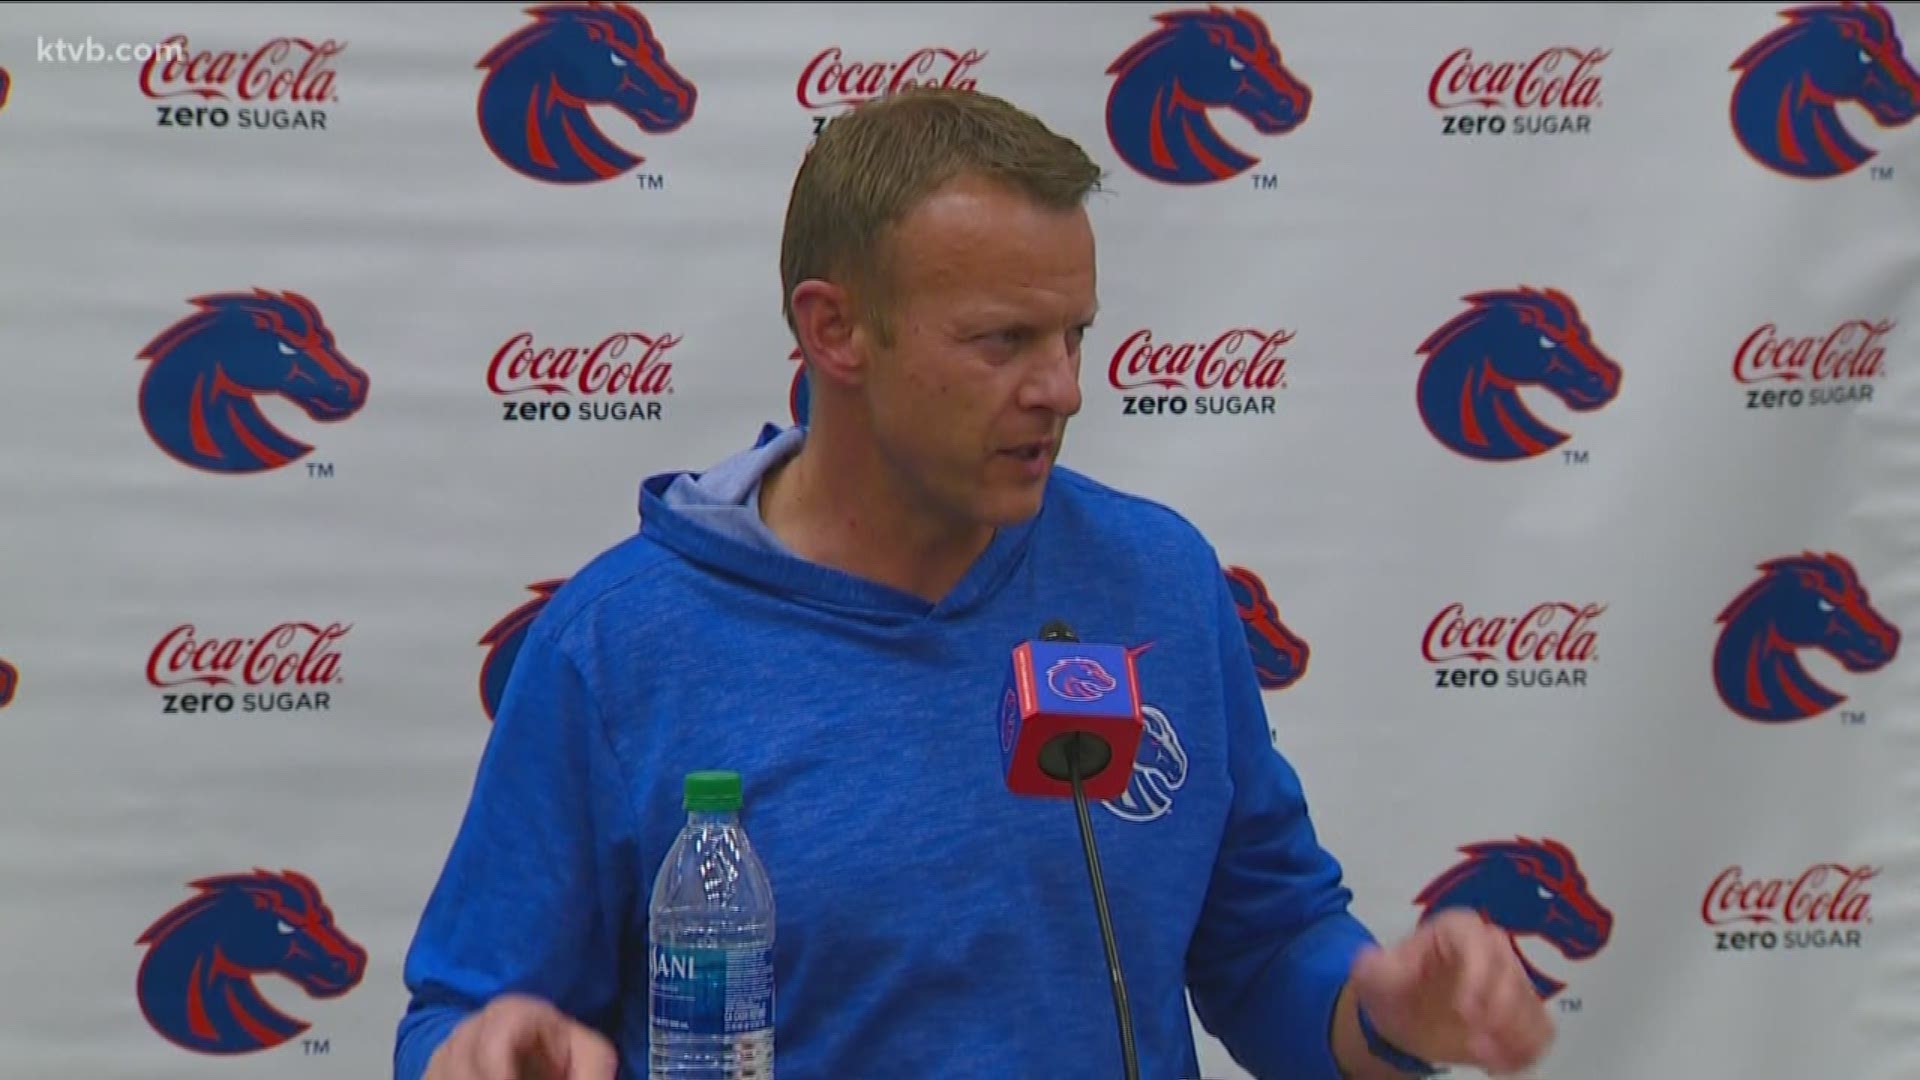 We hear from both coaches as Boise State and Utah State prepare for a critical game this weekend with conference championship implications.